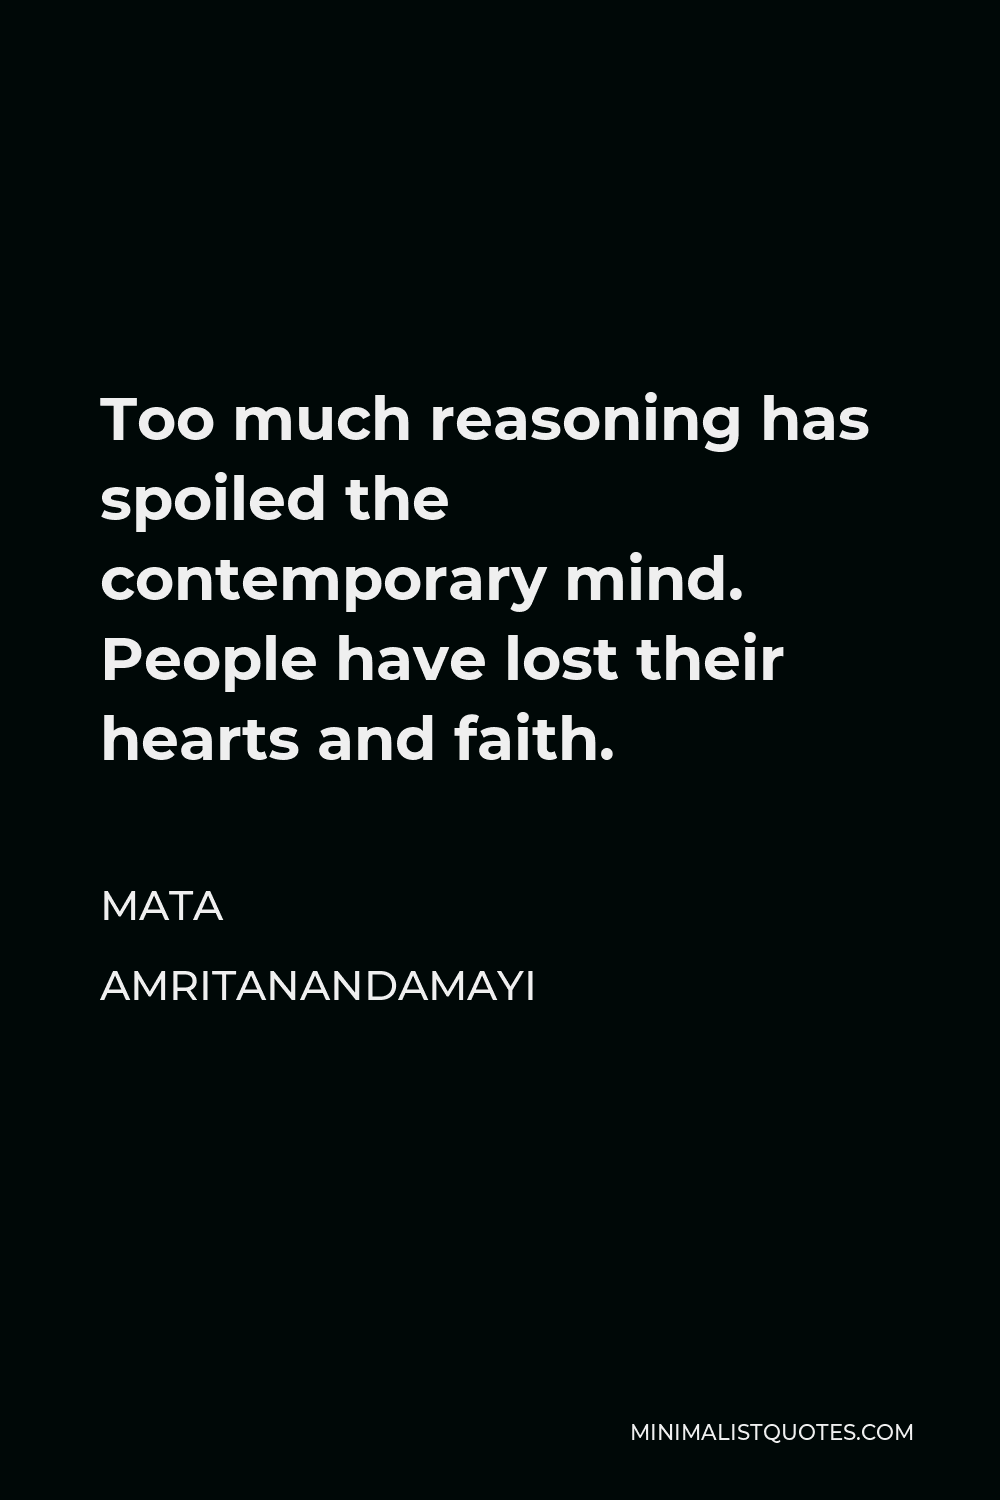 Mata Amritanandamayi Quote - Too much reasoning has spoiled the contemporary mind. People have lost their hearts and faith.